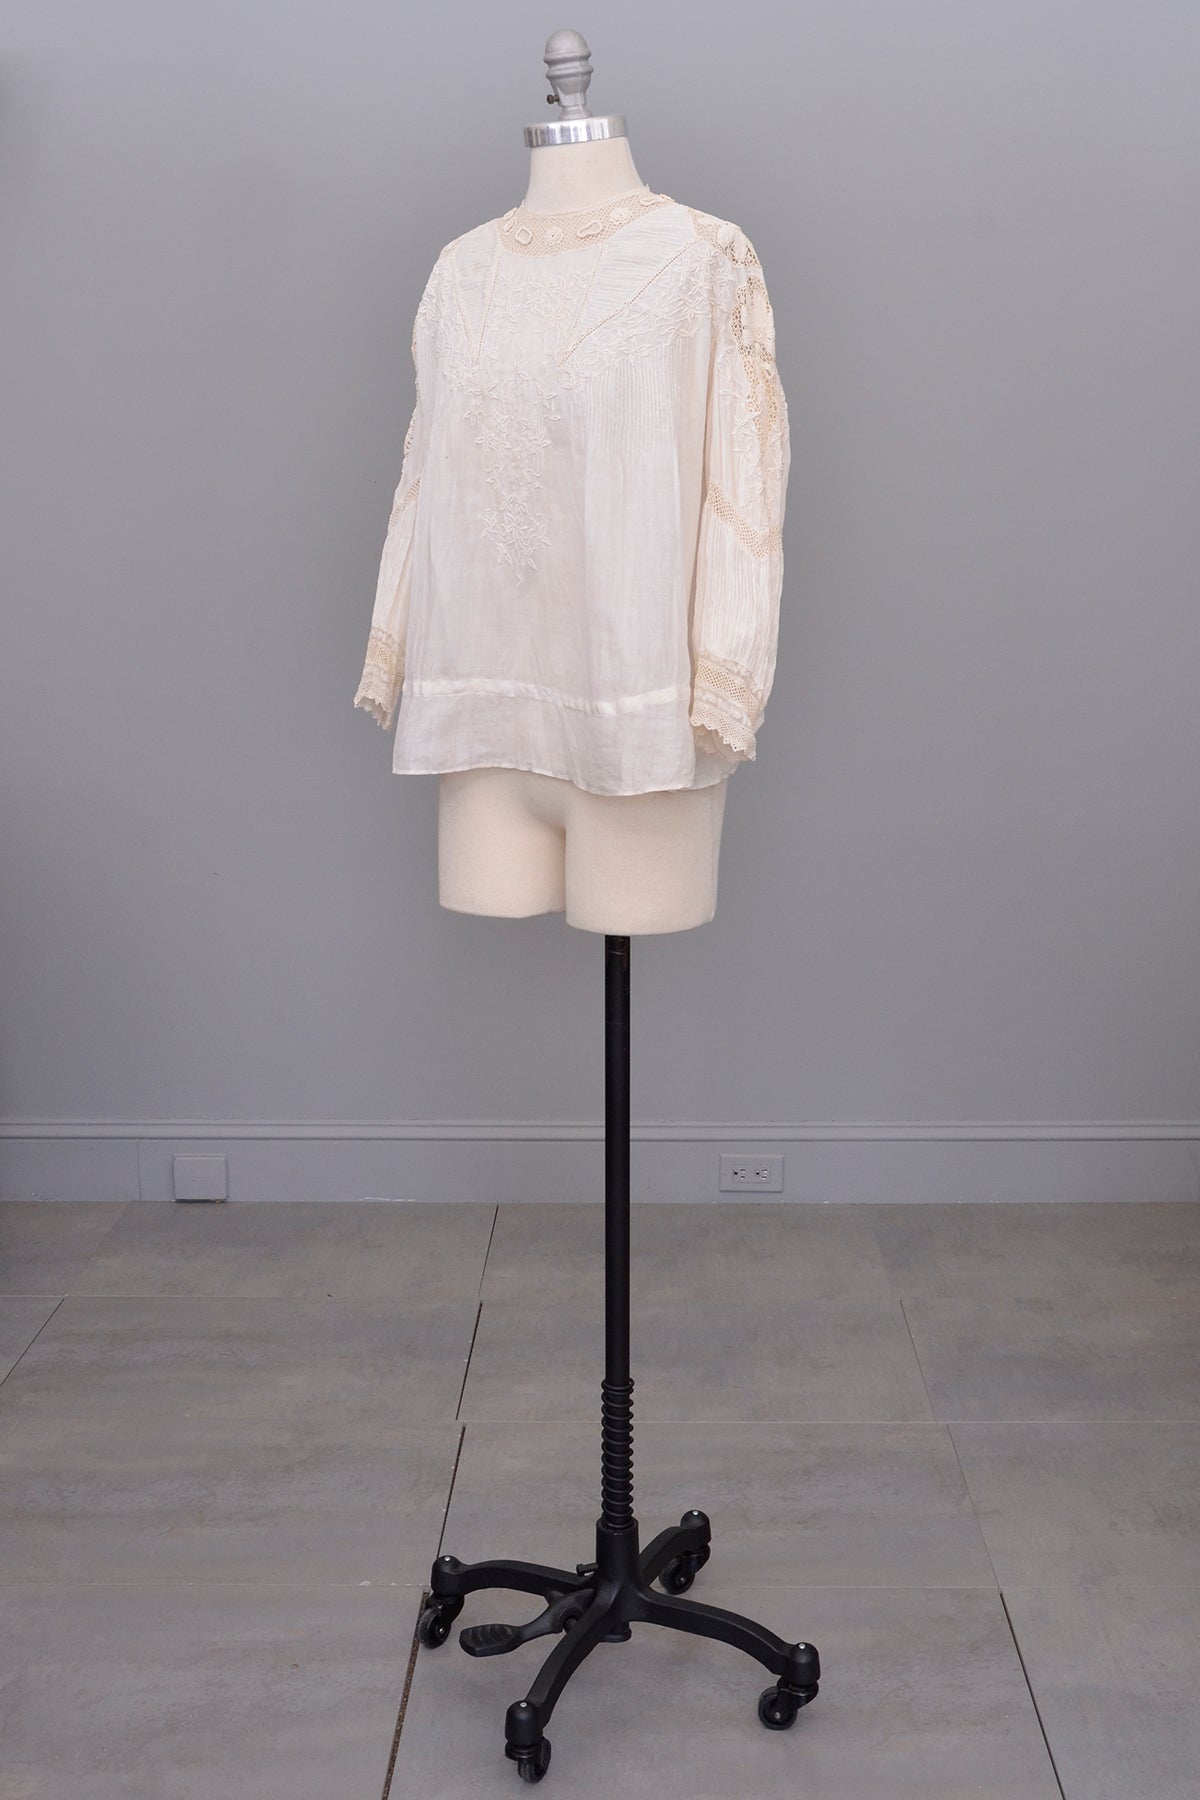 Edwardian White Blouse with Crochet and Embroidery | Restoration needed